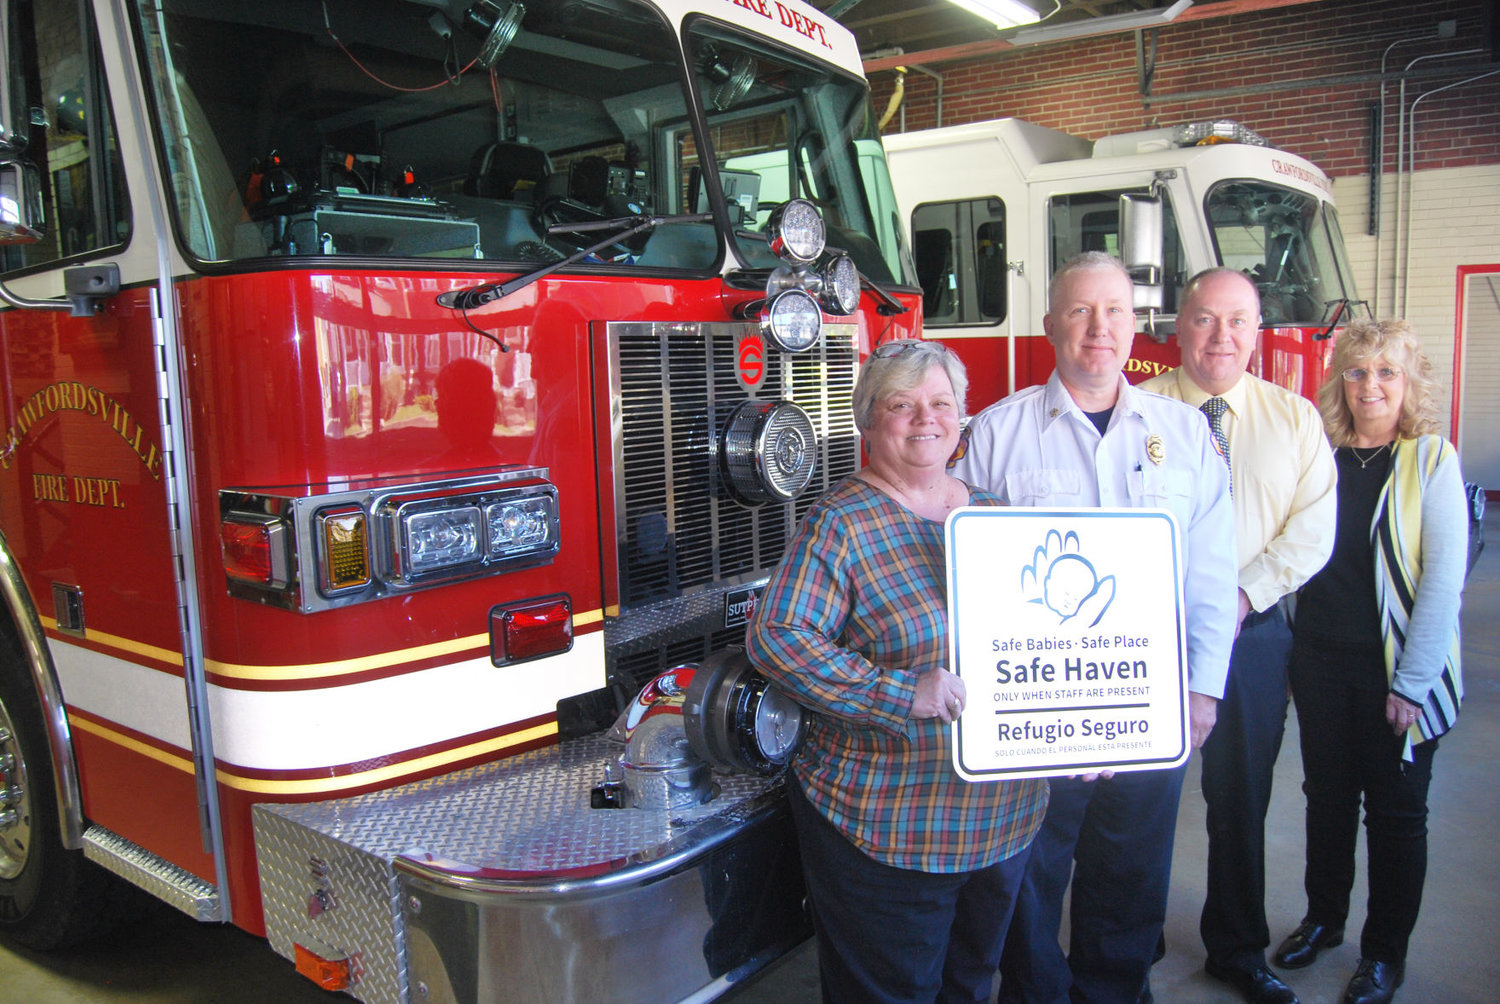 The Crawfordsville Fire/EMS Department received equipment and training on the state's Safe Haven law, which allows people to relinquish unharmed babies to firehouses and other designated sites. Montgomery County Youth Service Bureau sponsored the training and supplies. Pictured from left are YSB executive director Karen Branch, Crawfordsville Fire Chief Scott Busenbark, Mayor Todd Barton and National Safe Haven Alliance representative Denise Maxwell.